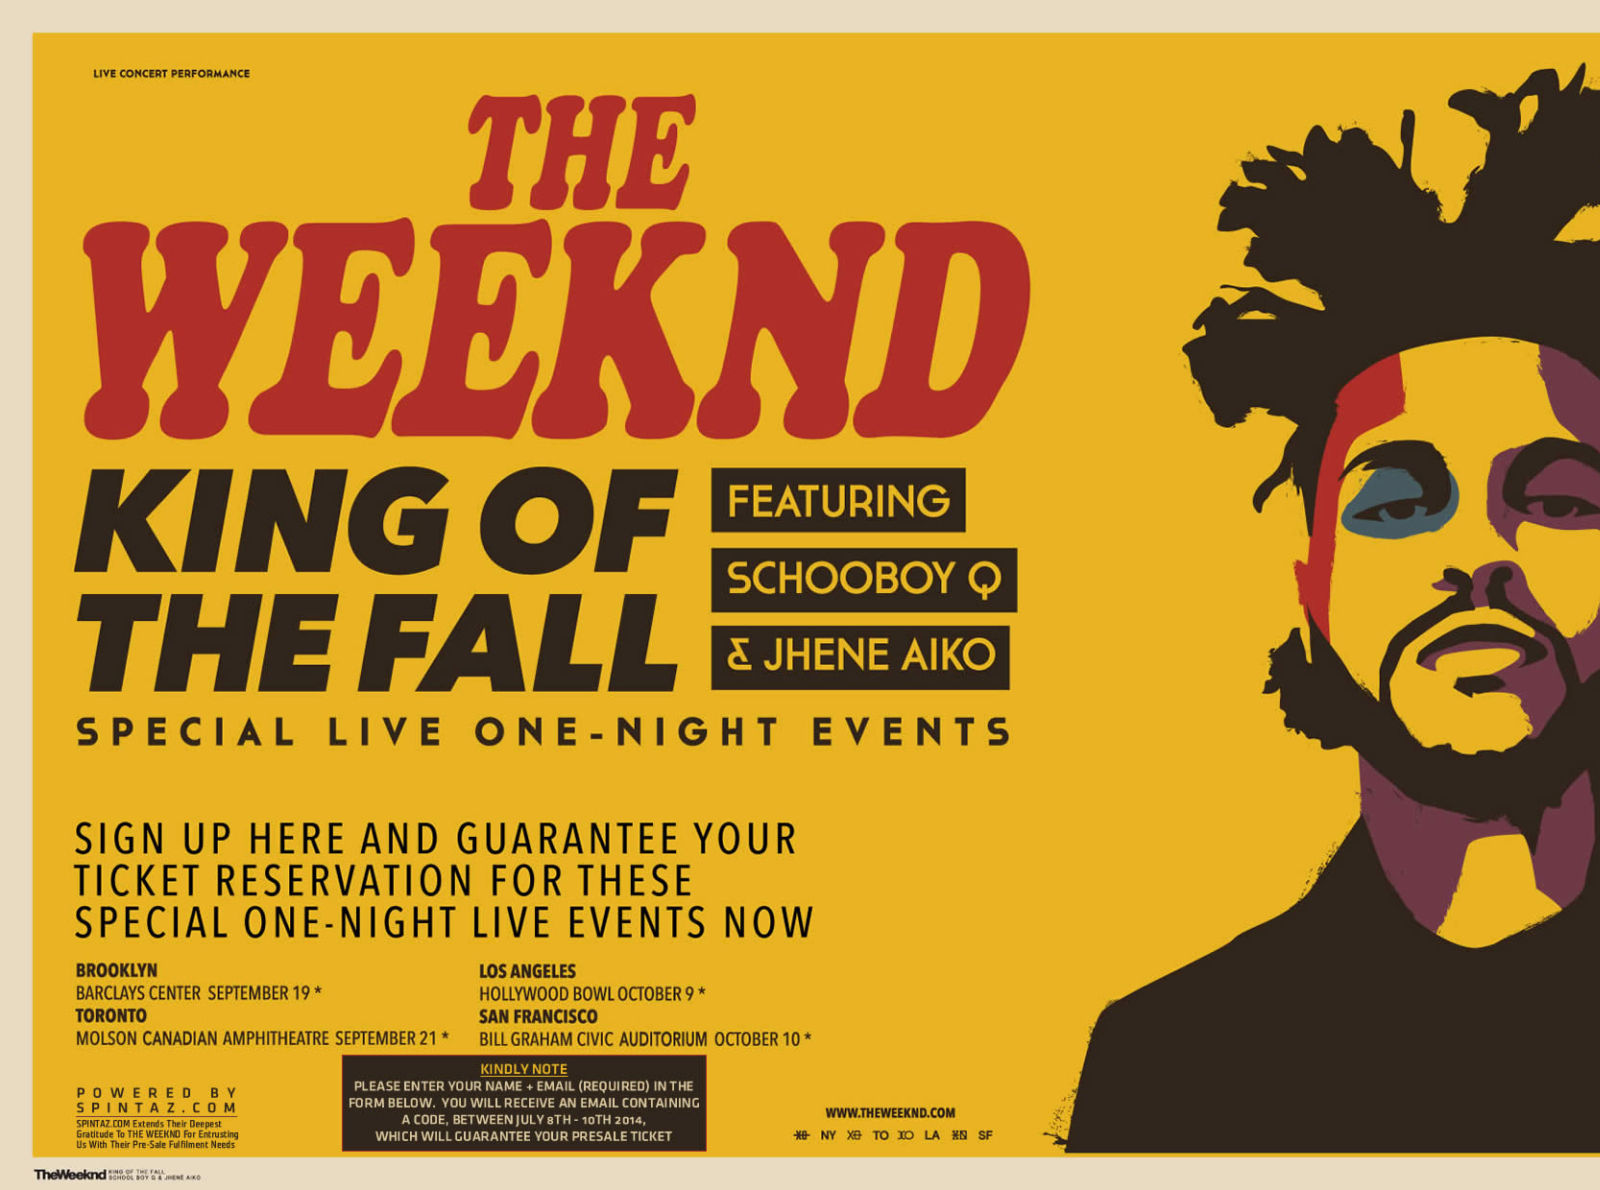 All the concert tickets already. The Weeknd poster. The Weeknd плакат. Концерт the Weeknd. Плакат концерта.